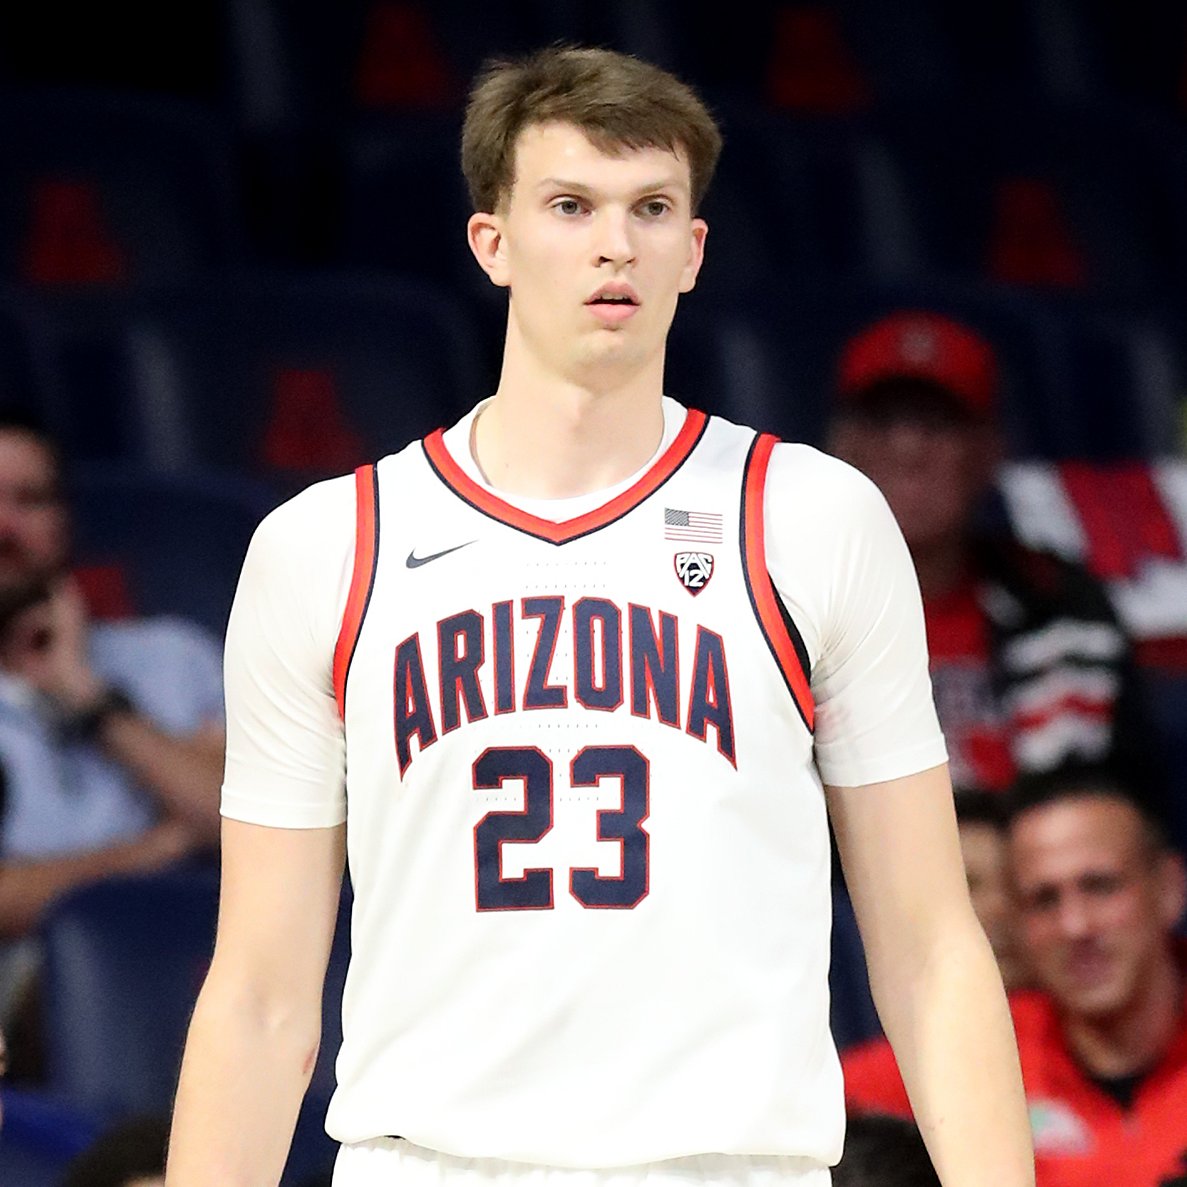 NEWS: Paulius Murauskas will transfer to Saint Mary's, a source told ESPN. One of the top international prospects in his age group will team up in Moraga with Lithuanian PG Augustas Marčiulionis. Should be a major contributor in the WCC.